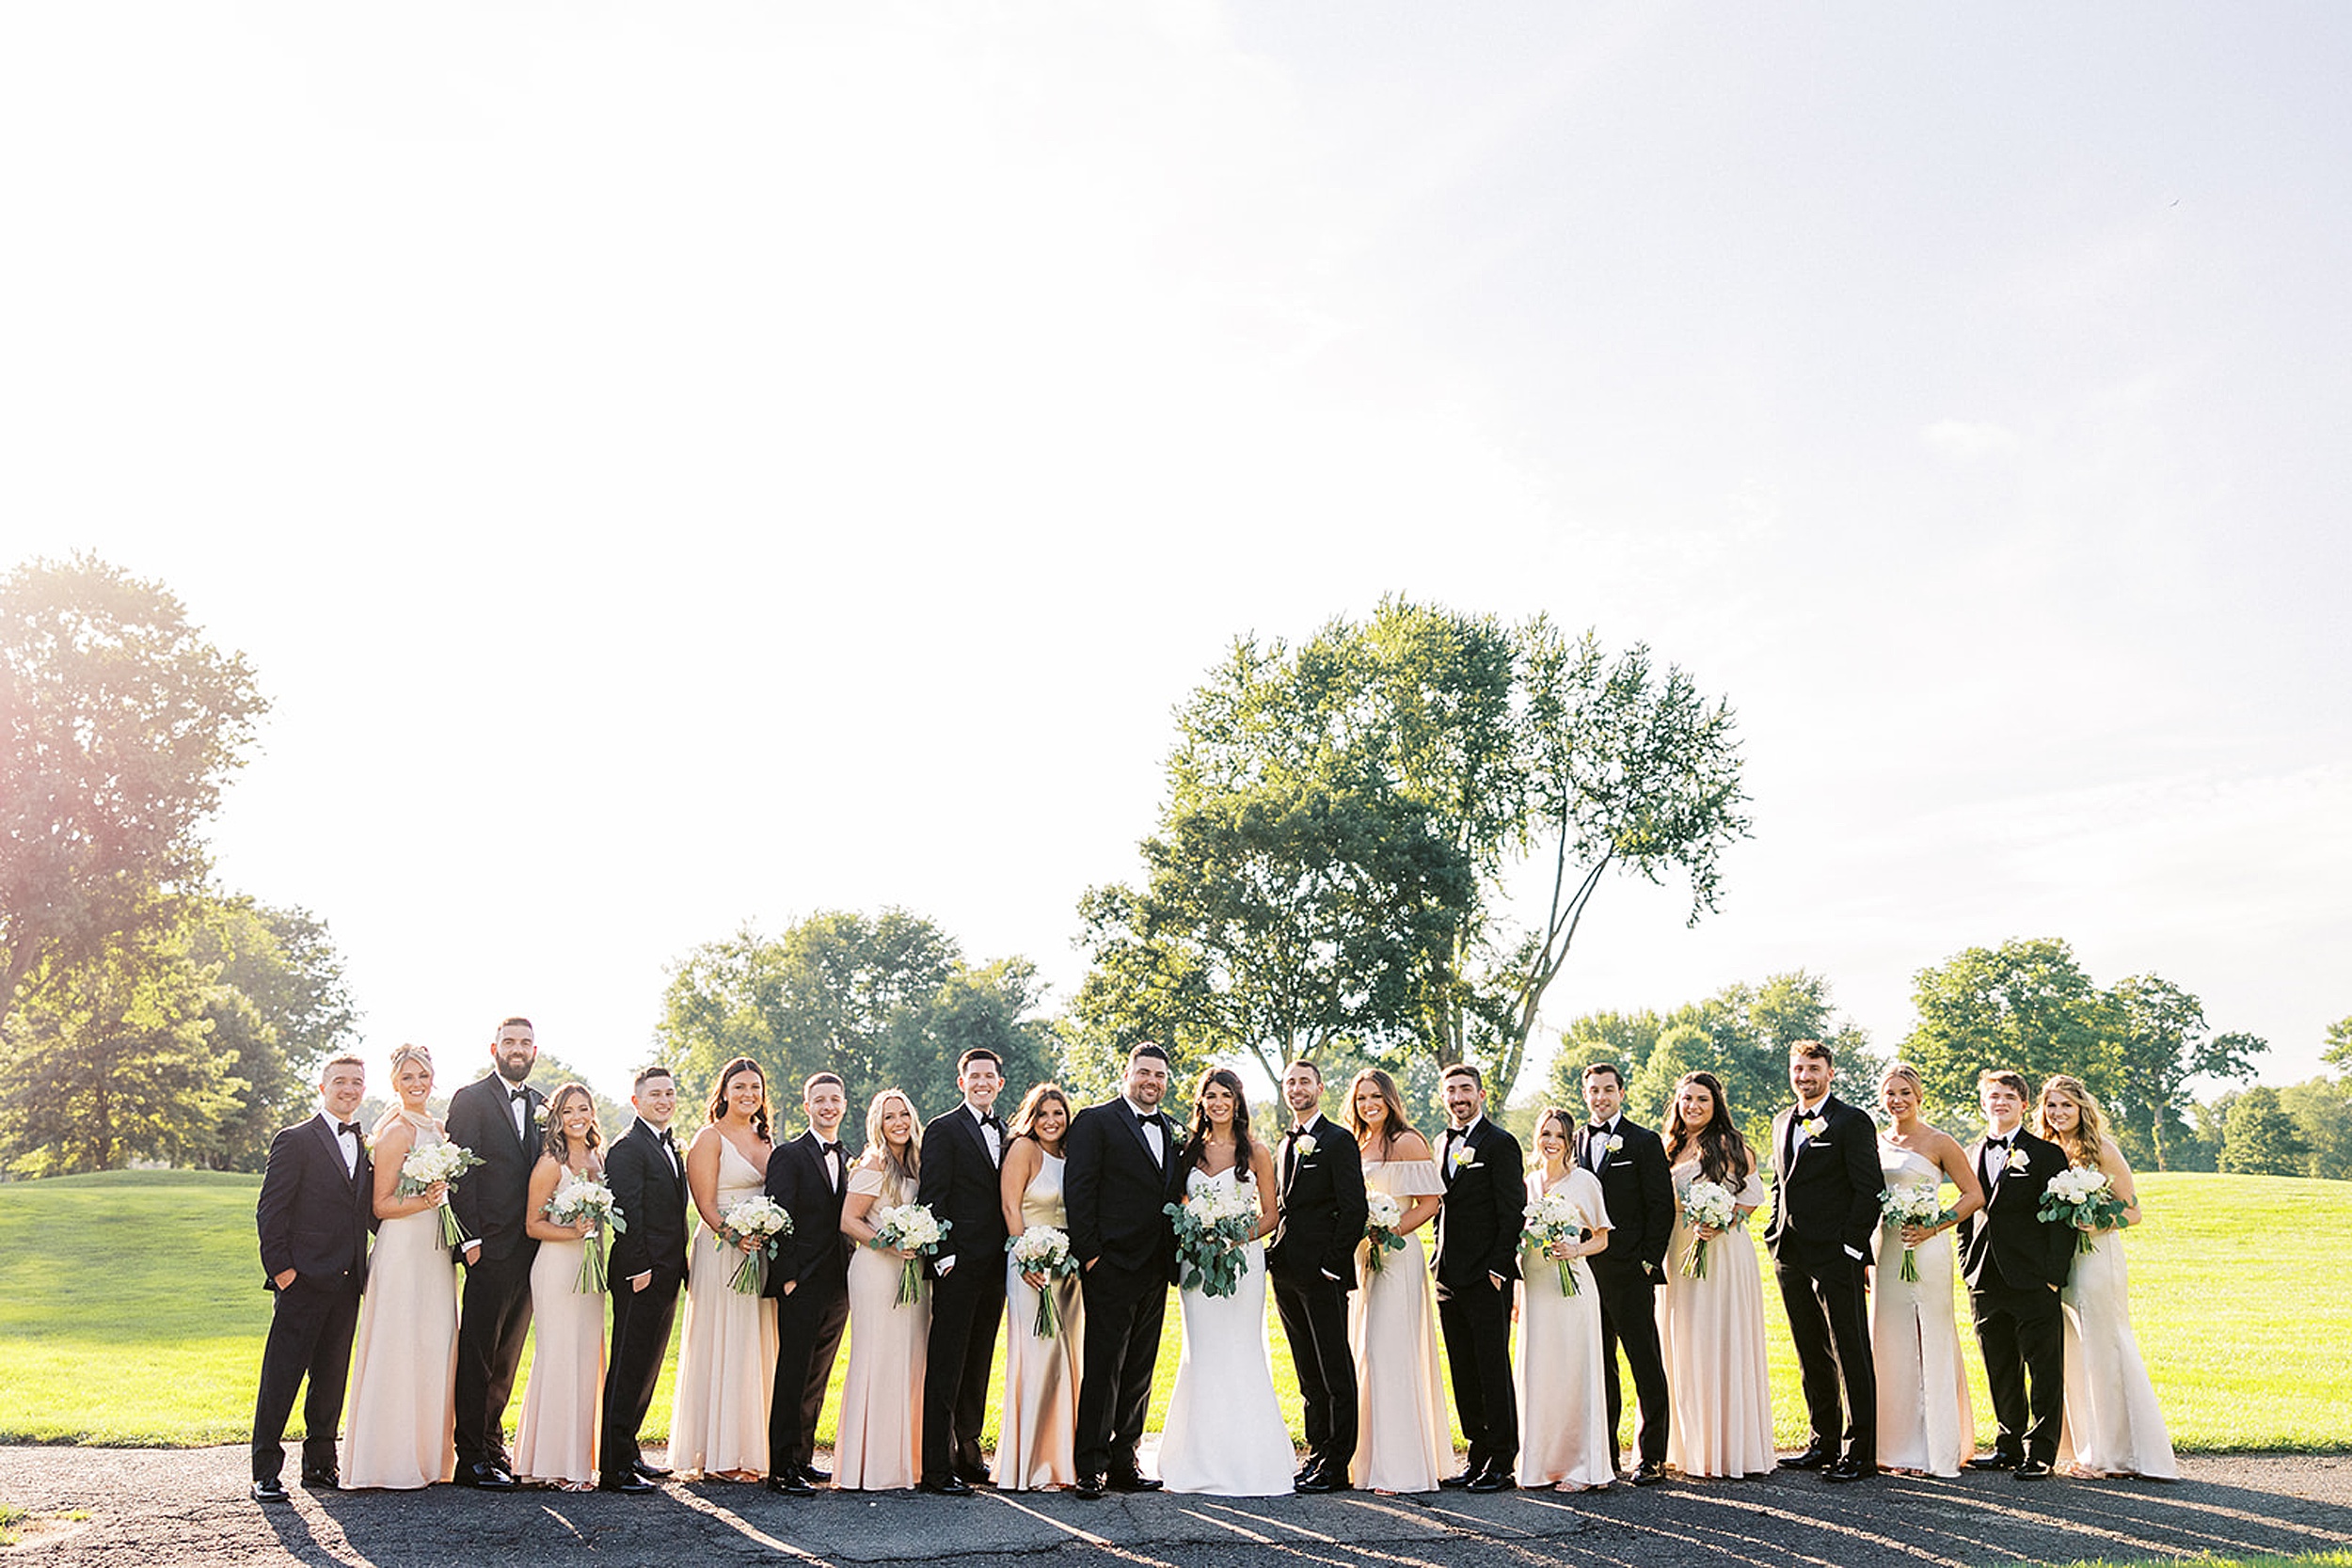 Newlyweds stand in line with their large wedding party at sunset on a golf course